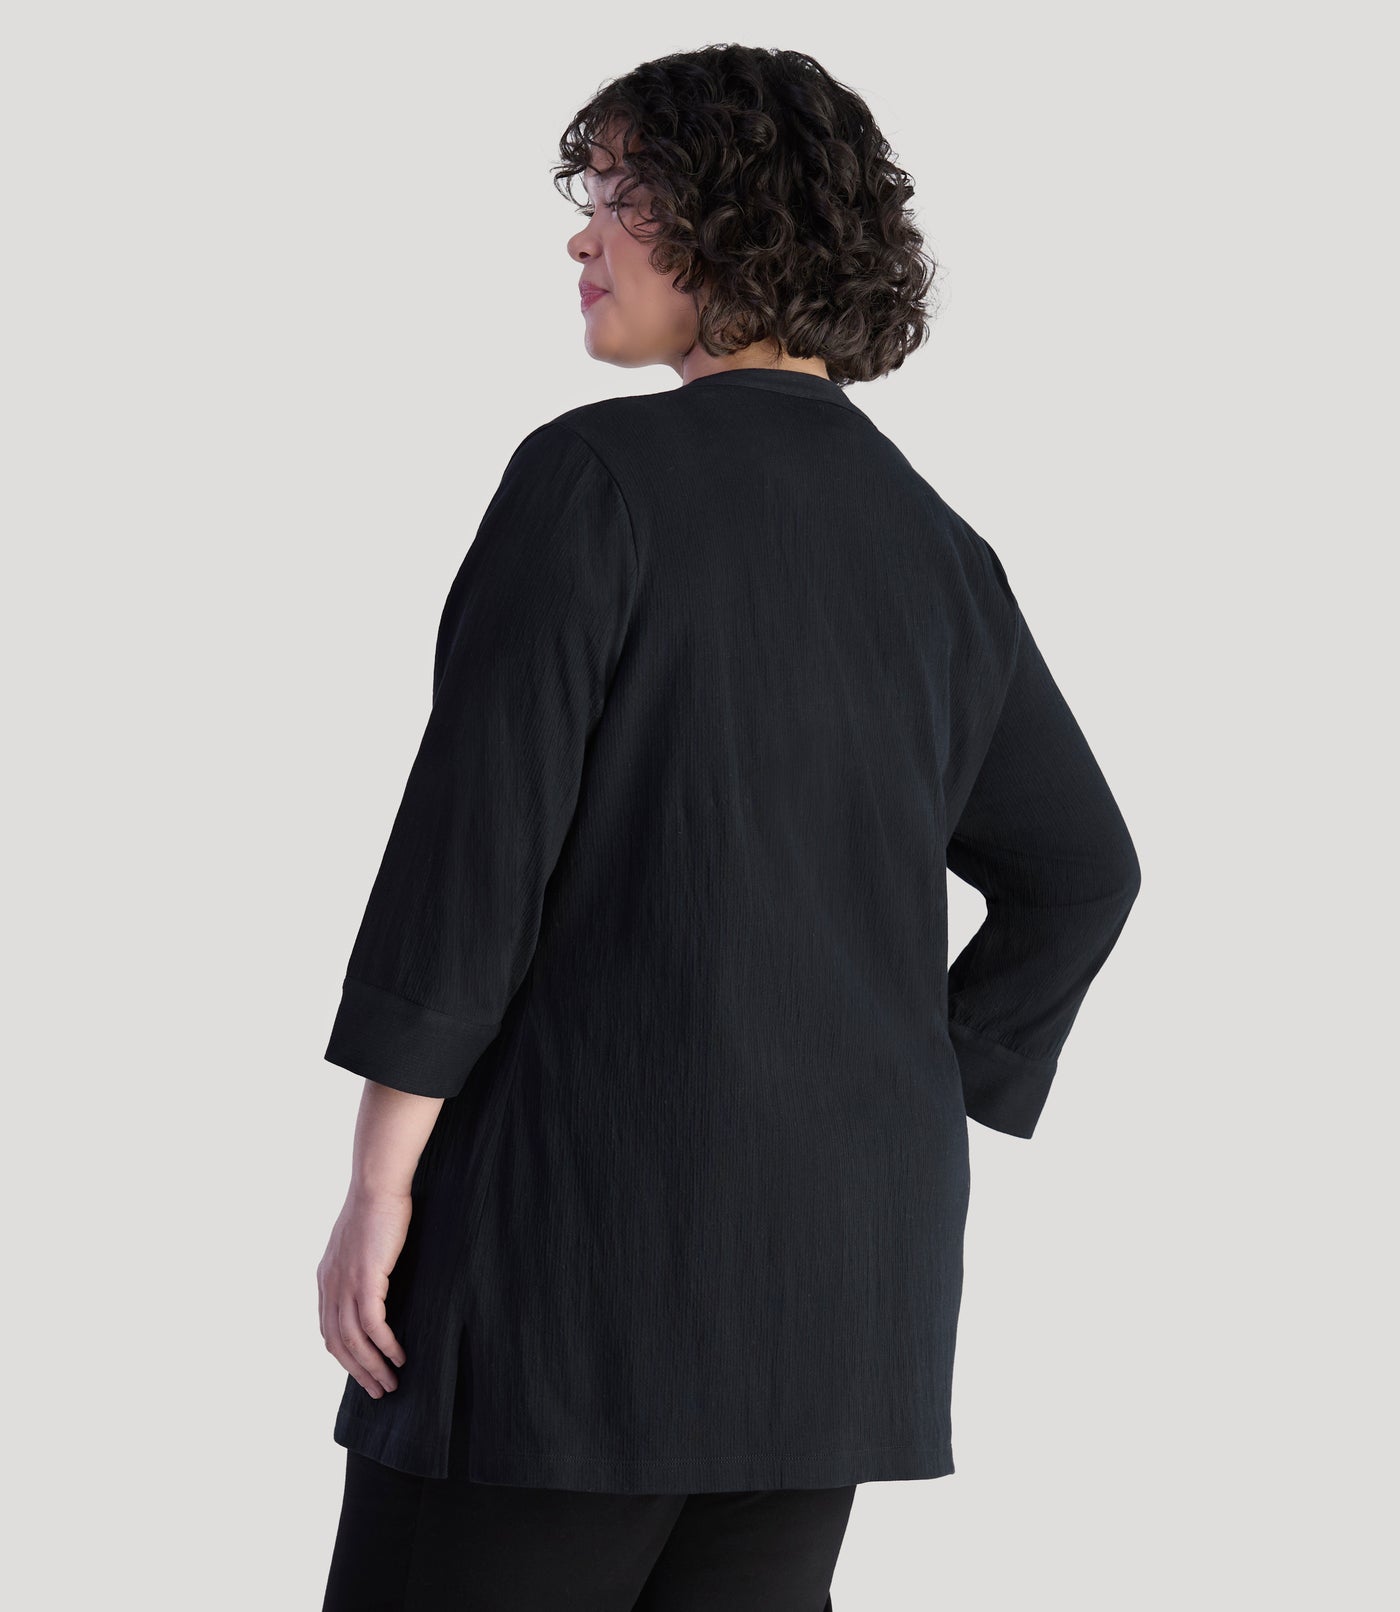 Plus size model, facing back, wearing EZ Style Cotton plus size 3/4 Sleeve Split Neck Tunic with Pockets in color black.